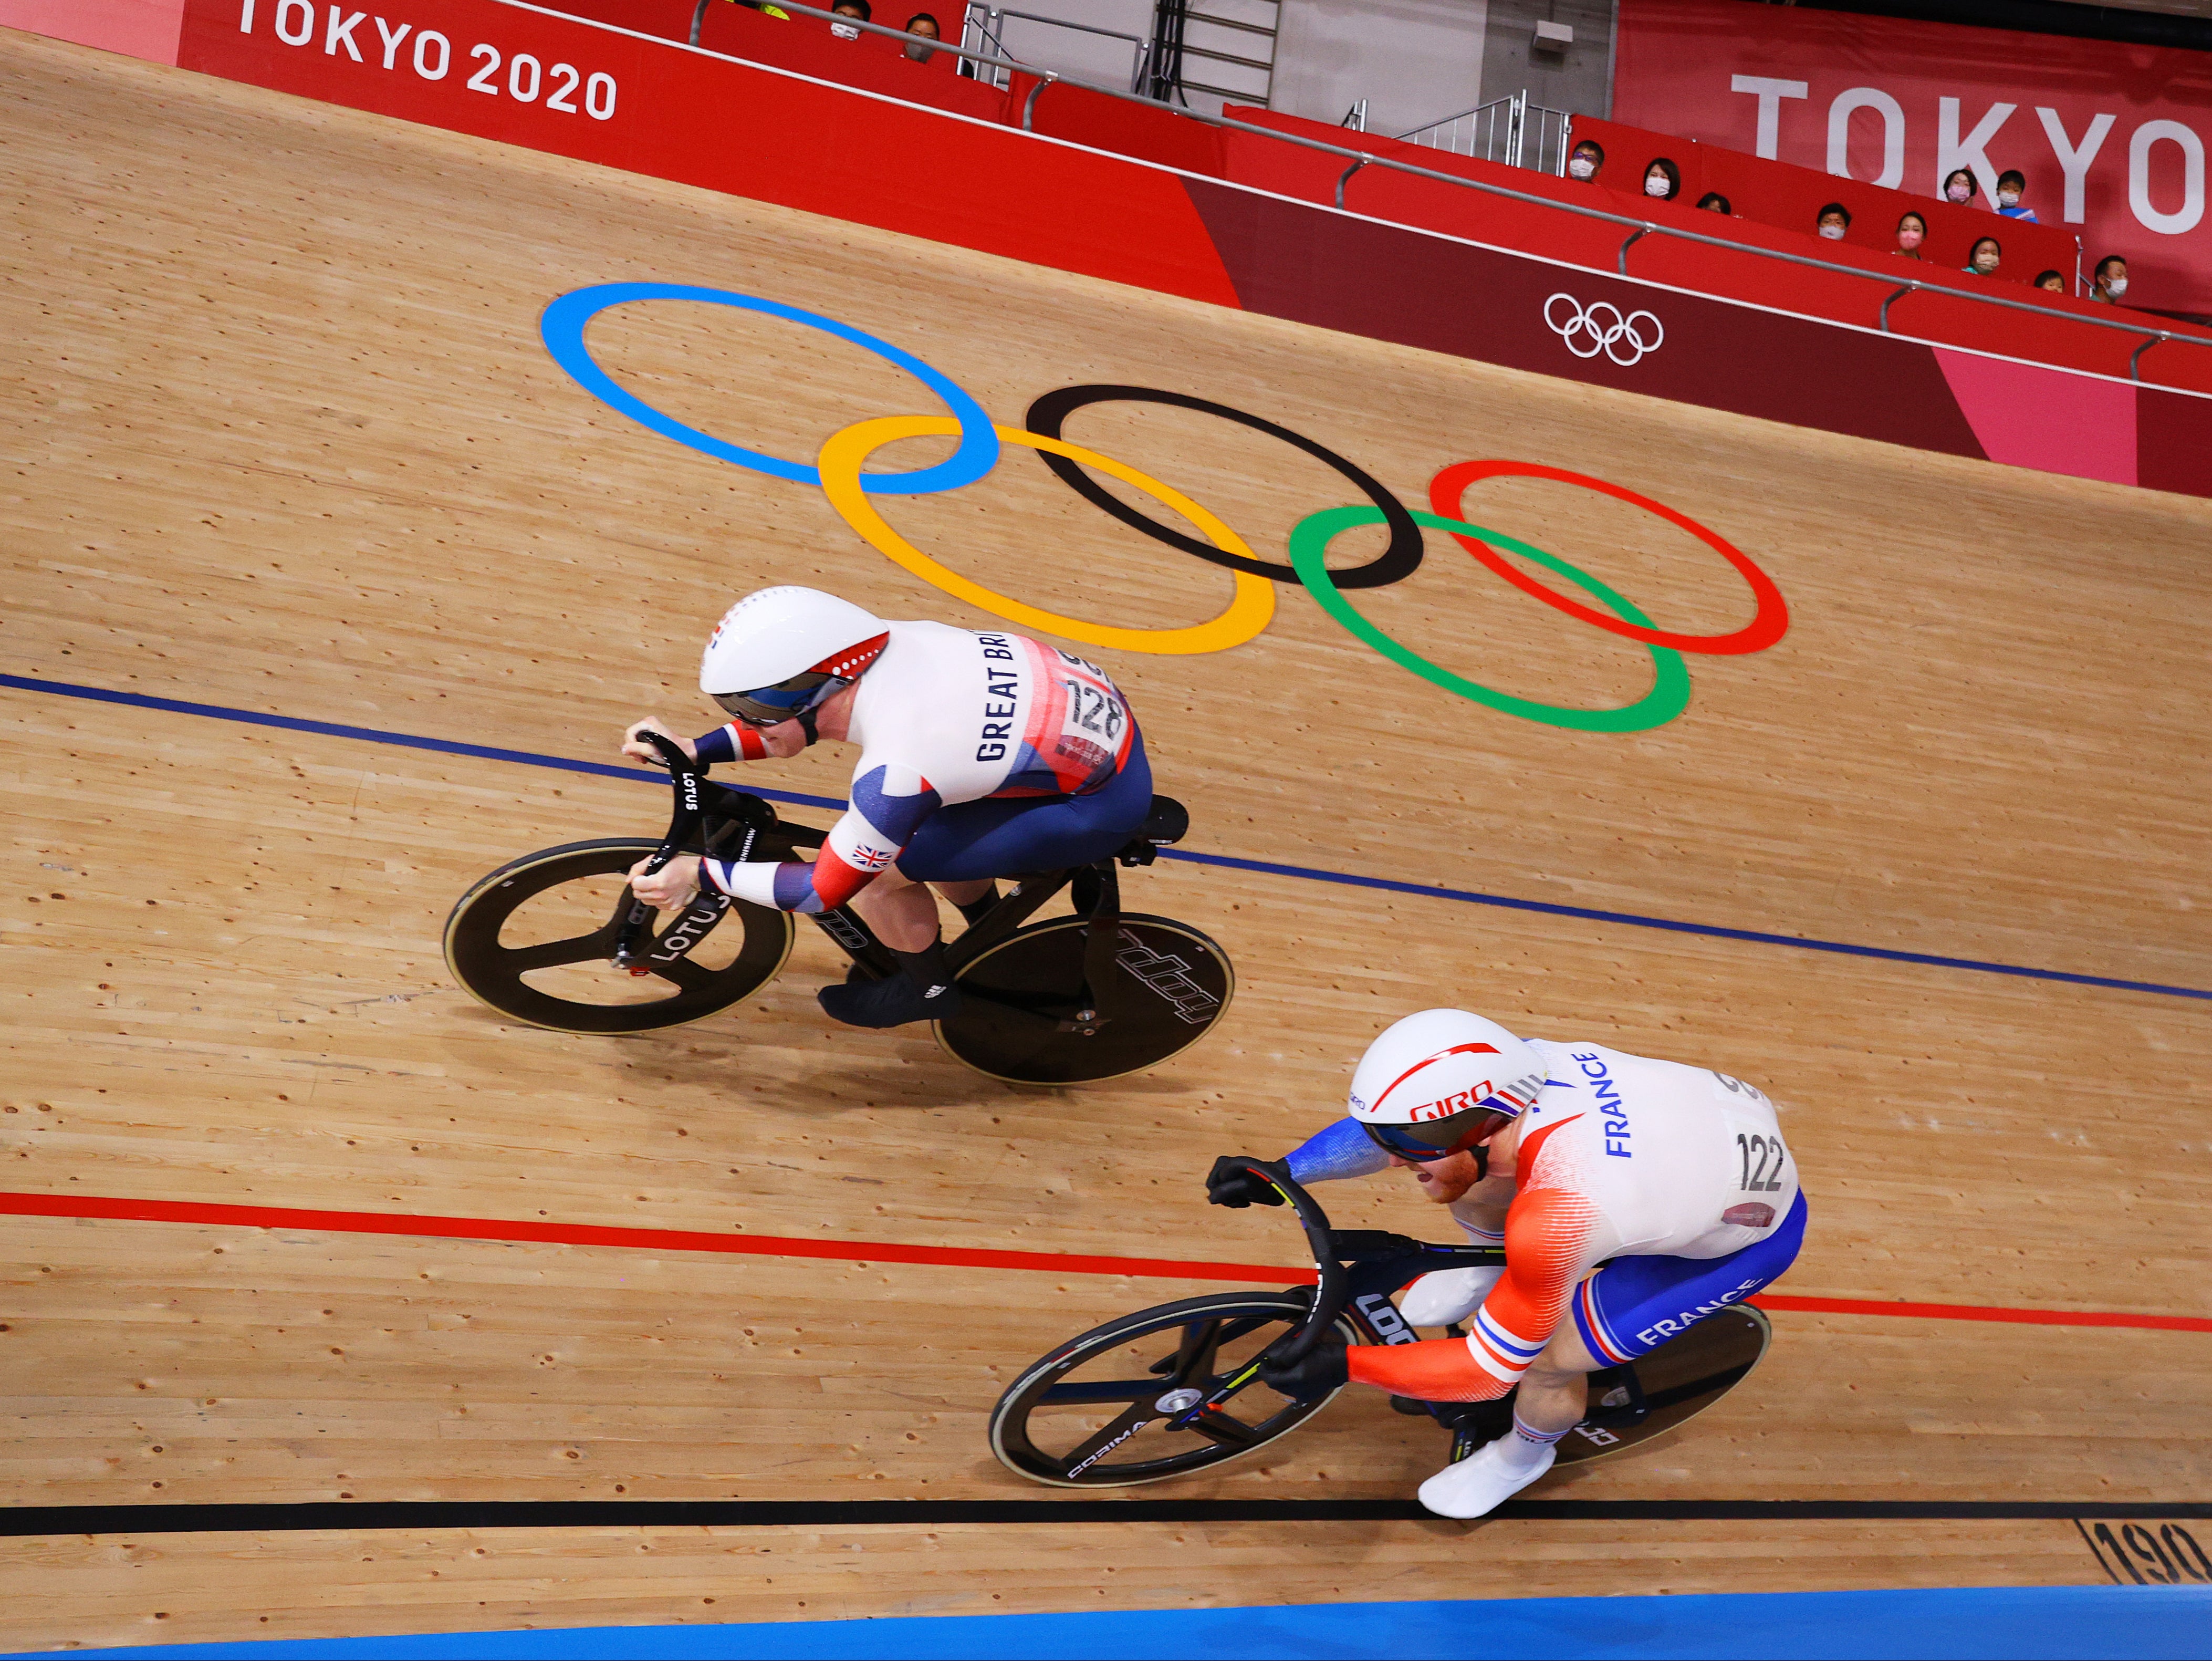 Olympic track cycling schedule Events and start times from Tokyo 2020